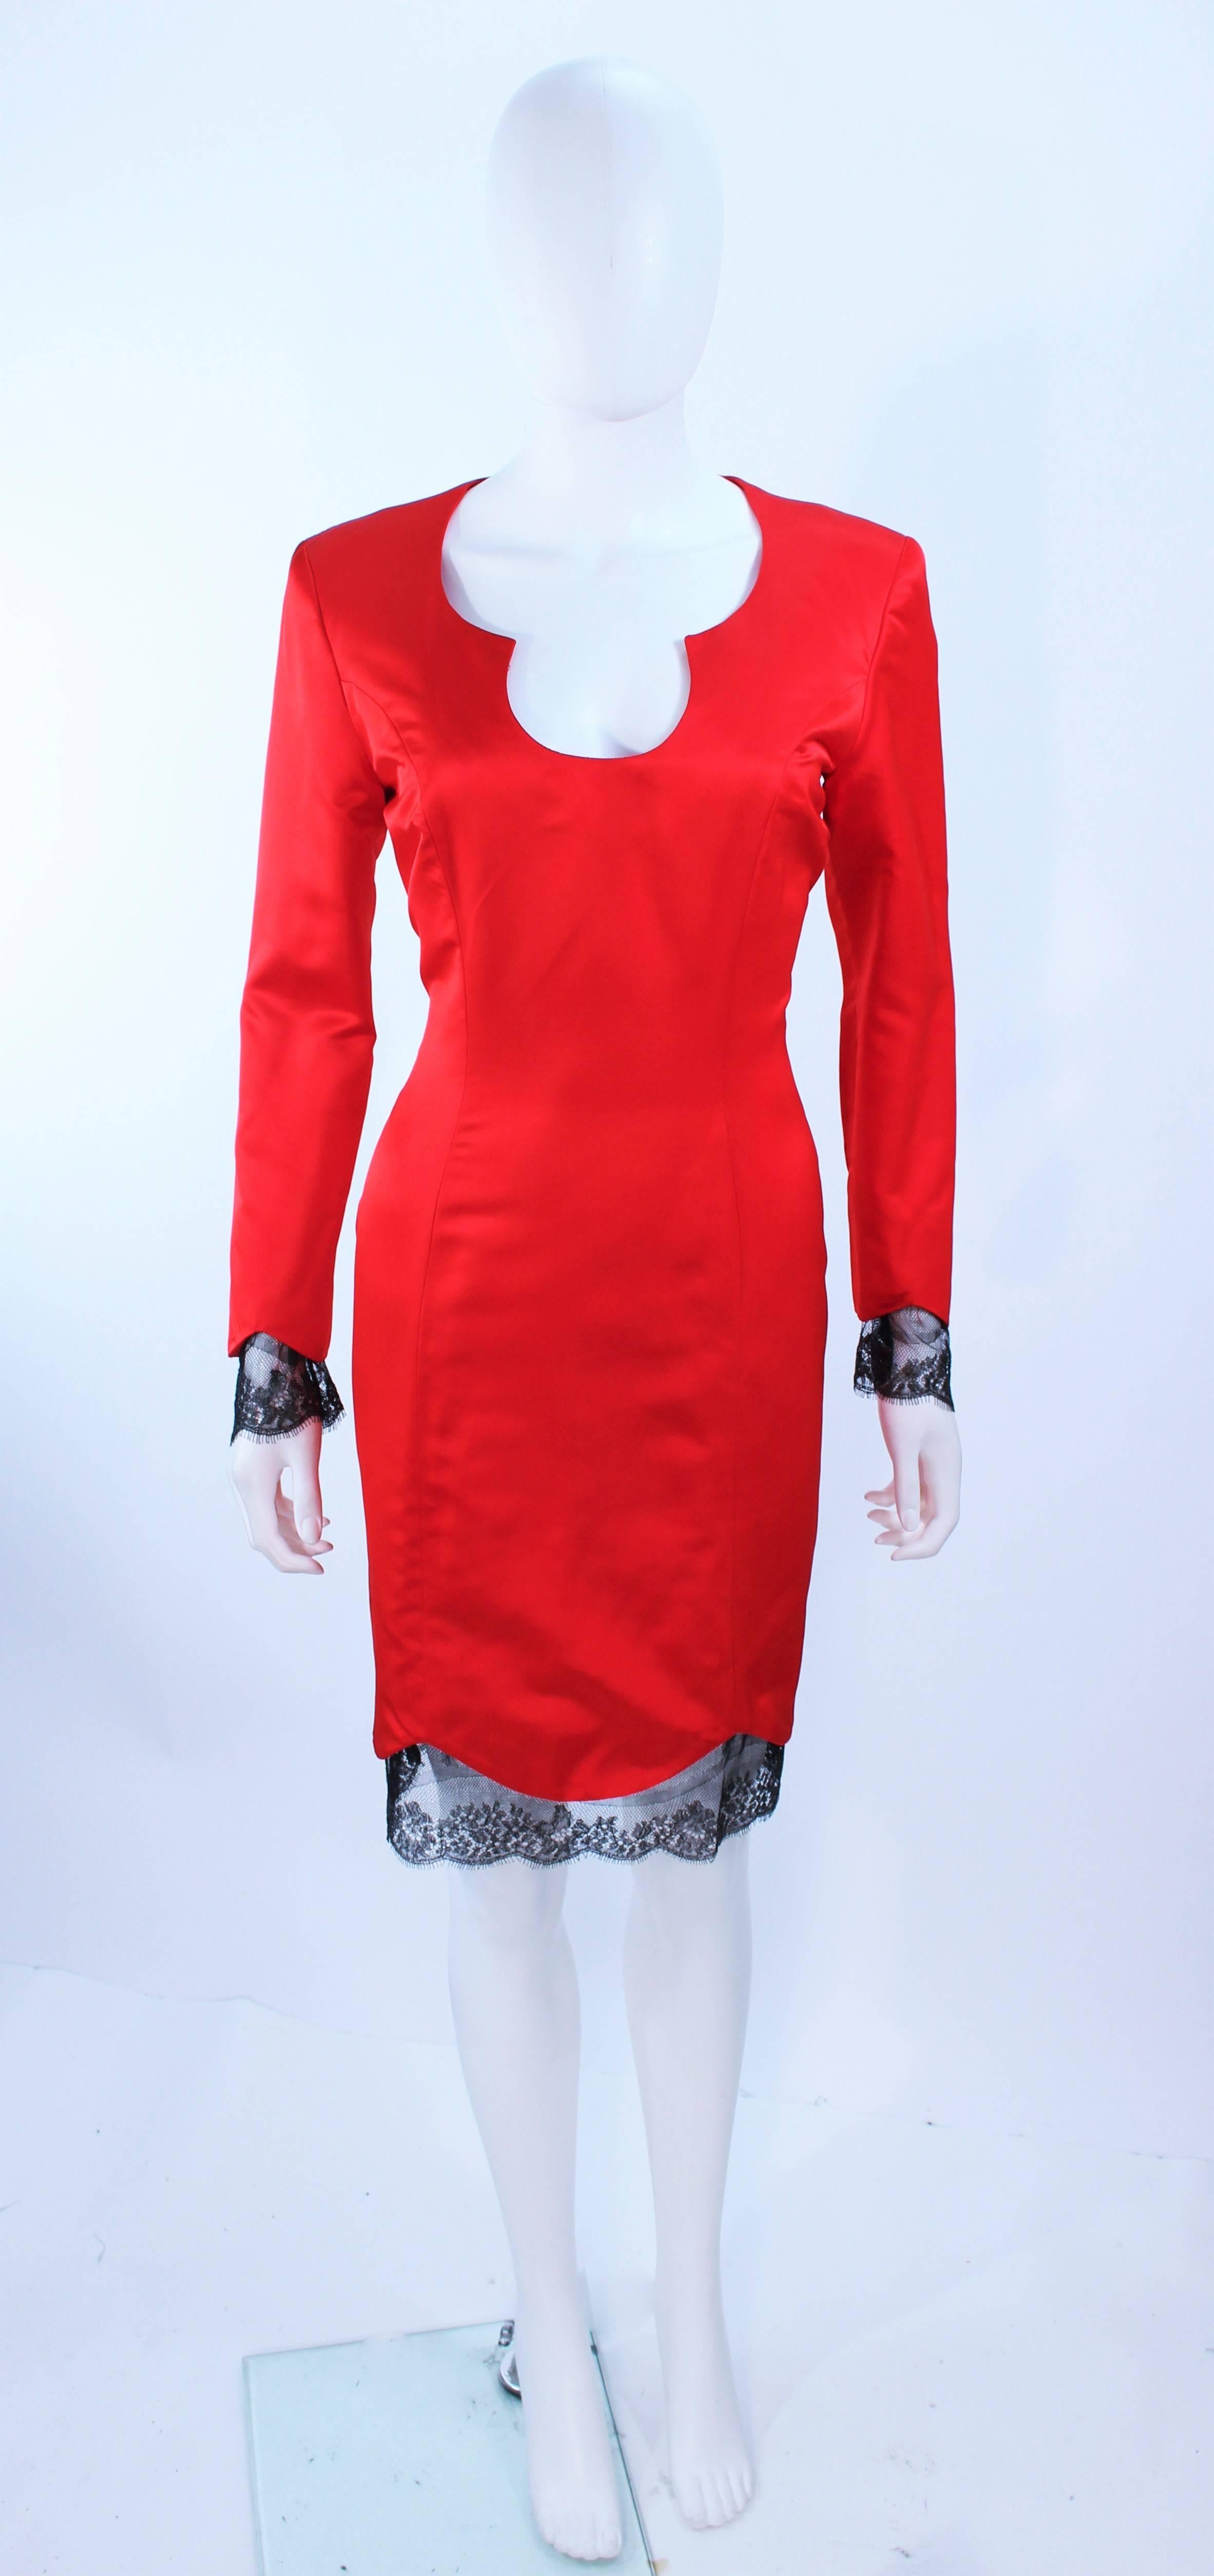 This Ted Heyman 'Zang Tou' design is composed of a red silk with scalloped lace trim. There is a center back zipper closure. In excellent vintage condition, hardly worn.

**Please cross-reference measurements for personal accuracy. Size in